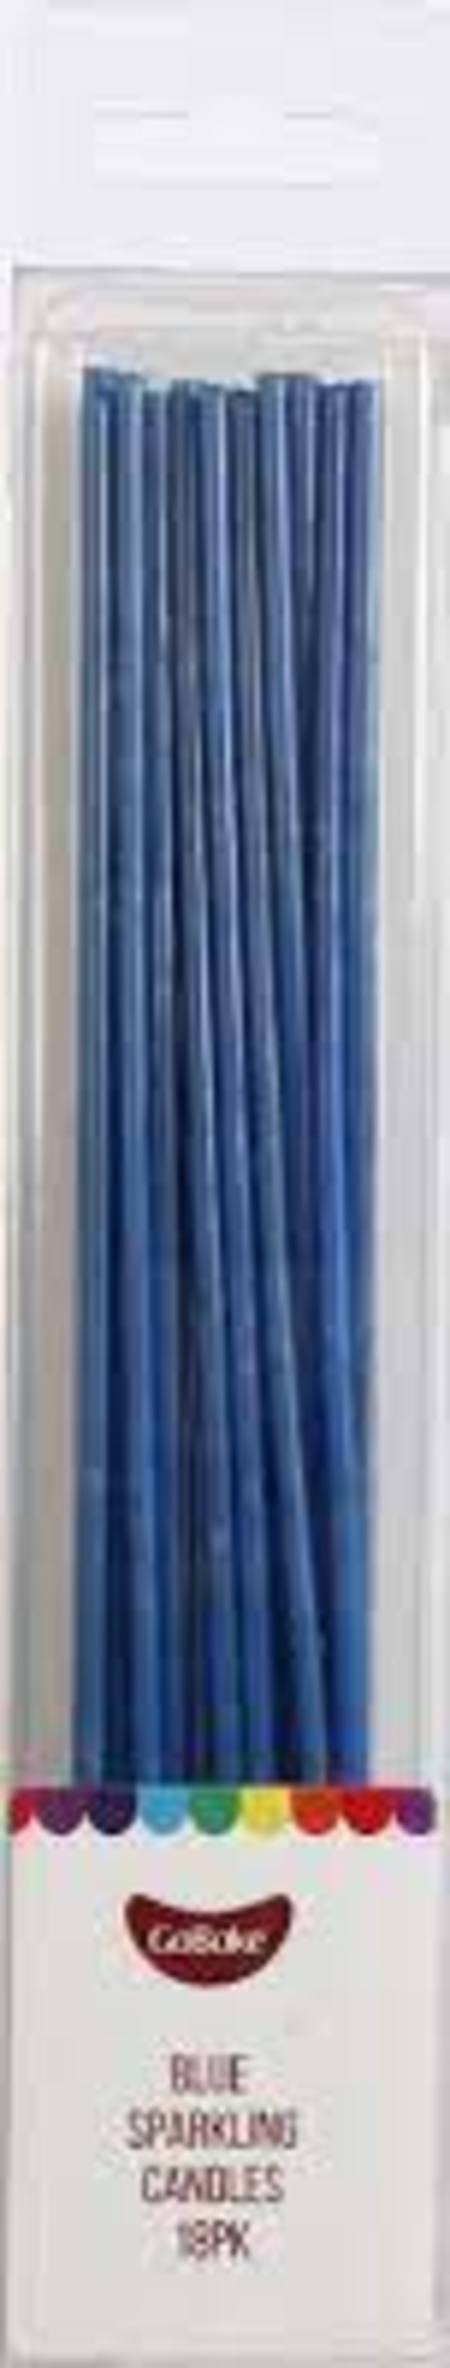 Buy Candles Sparkling - Blue Pkt of 18 in NZ. 